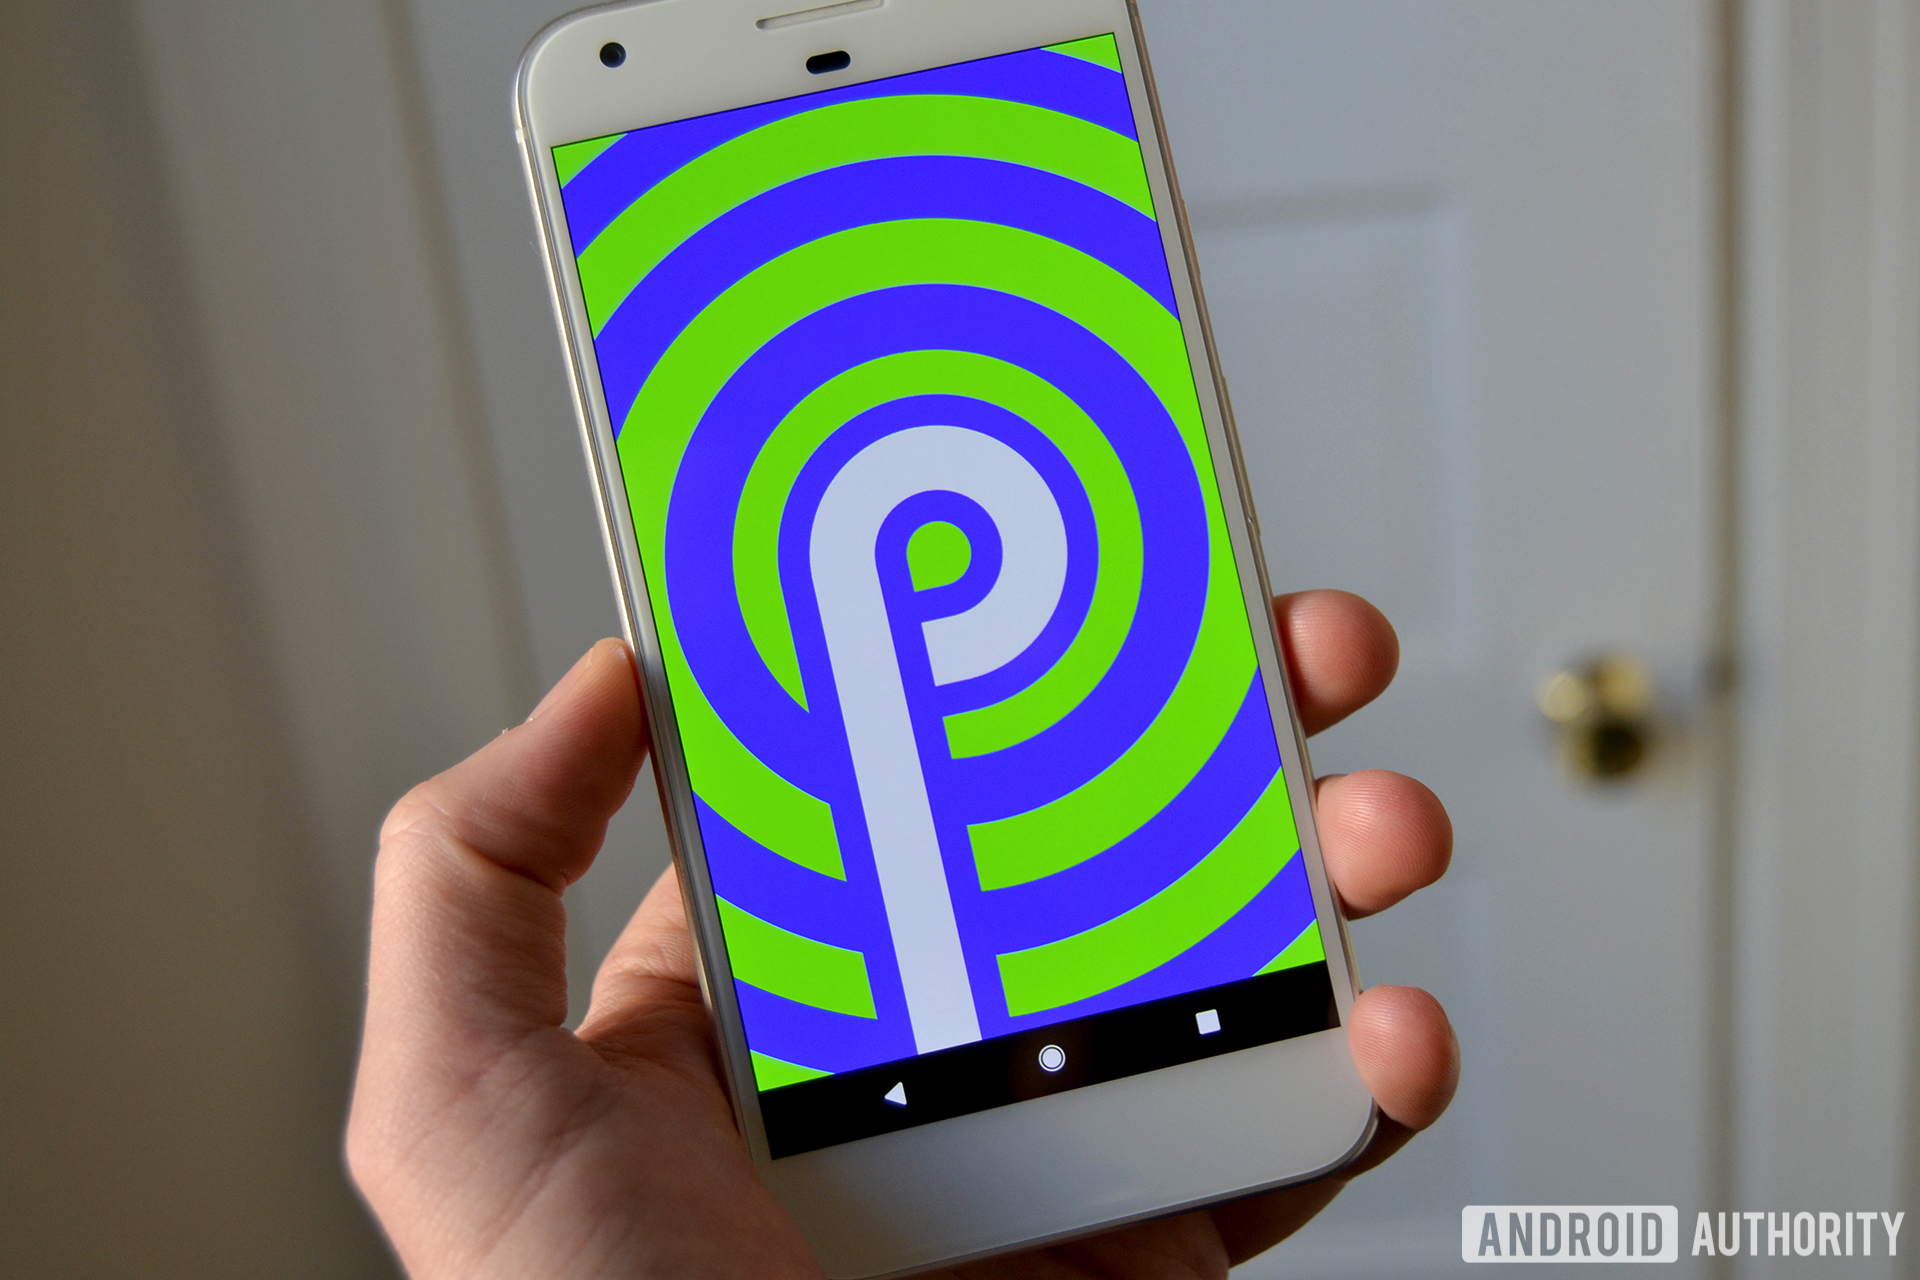 Android P Developer Preview